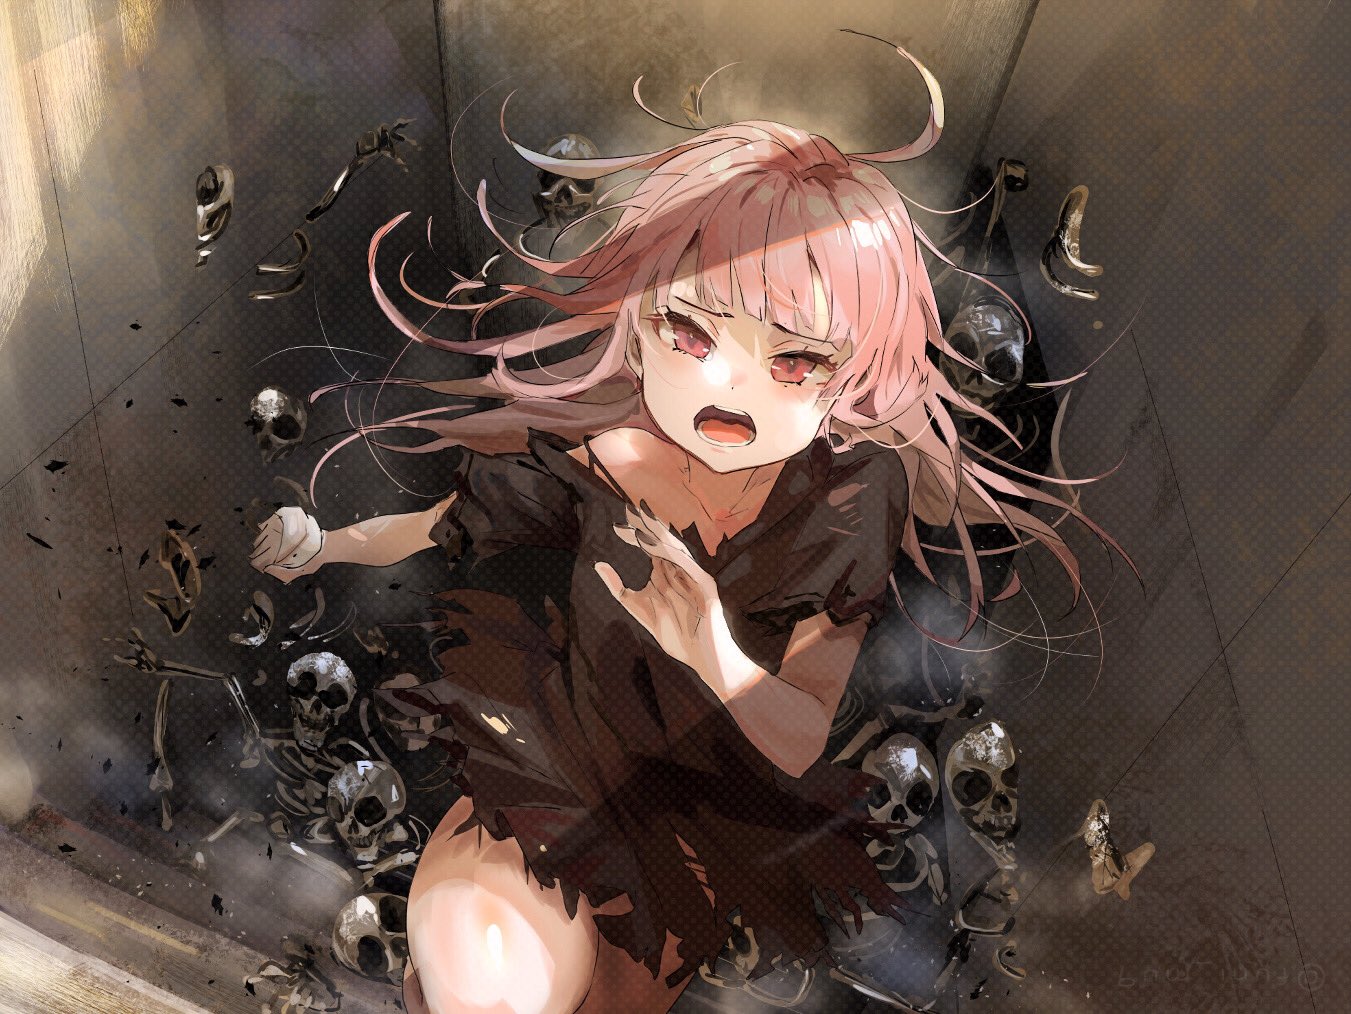 Mori Calliope Hololive English Hololive Pink Hair Skull And Bones Virtual Youtuber Anime Girls Stair 1351x1014